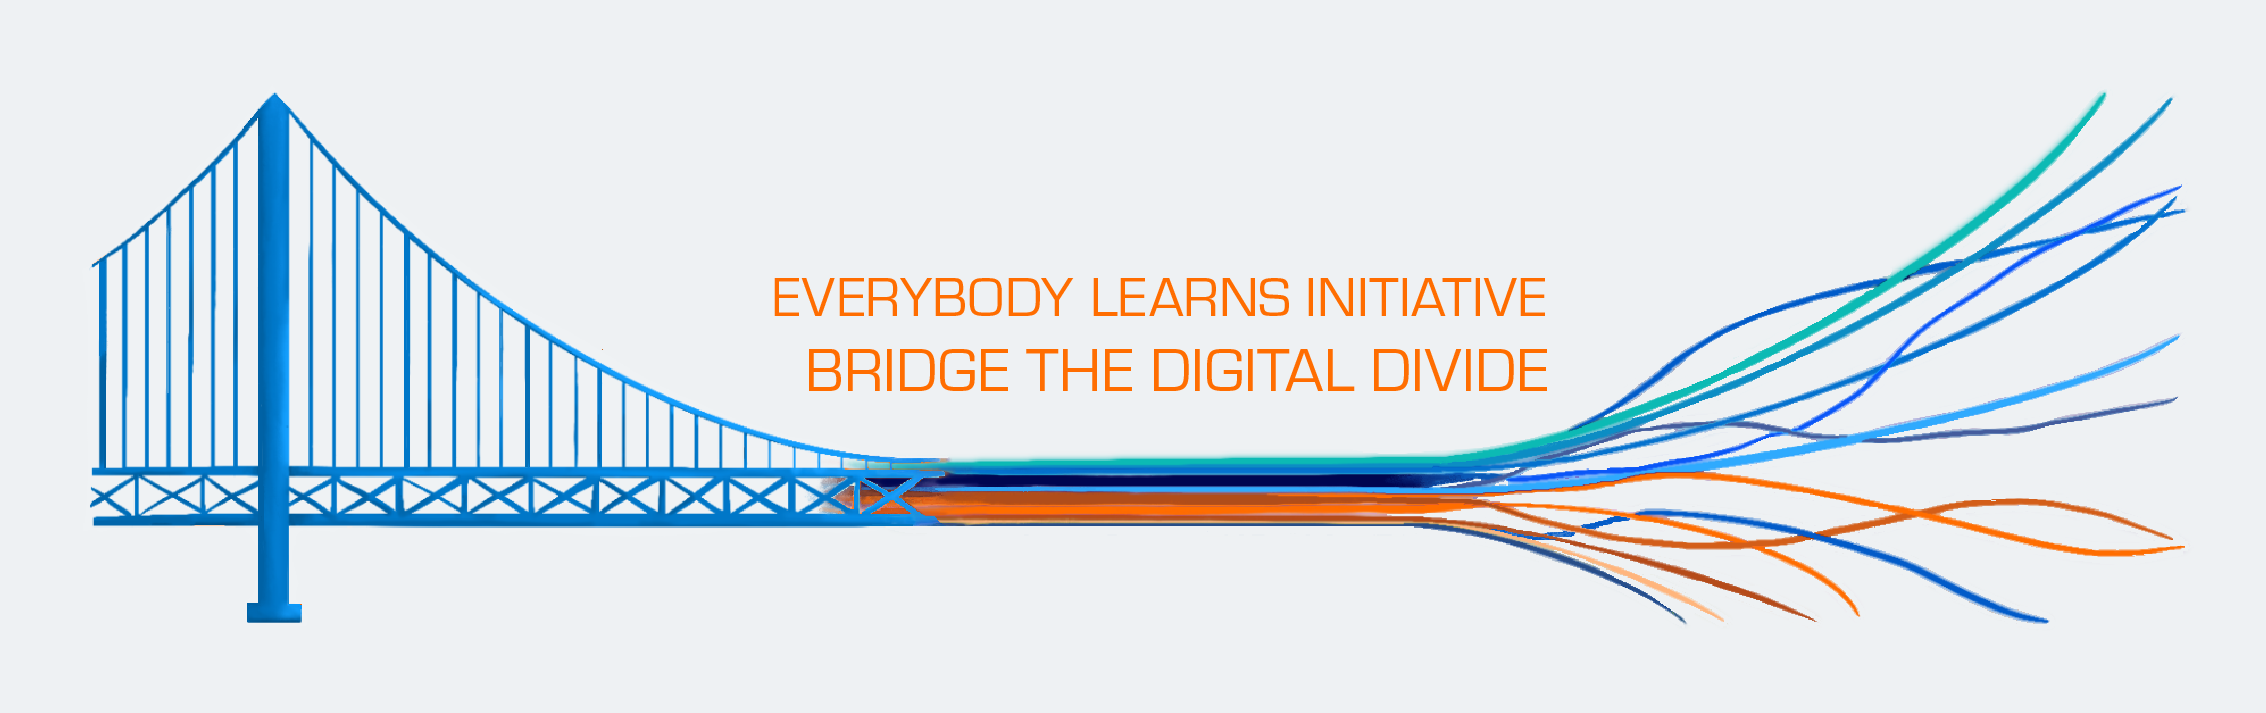 Illustration of a bridge with multi-colored light streams coming out of it on a light gray background. Text reads "Everybody Learns Initiative, Bridge the Digital Divide."